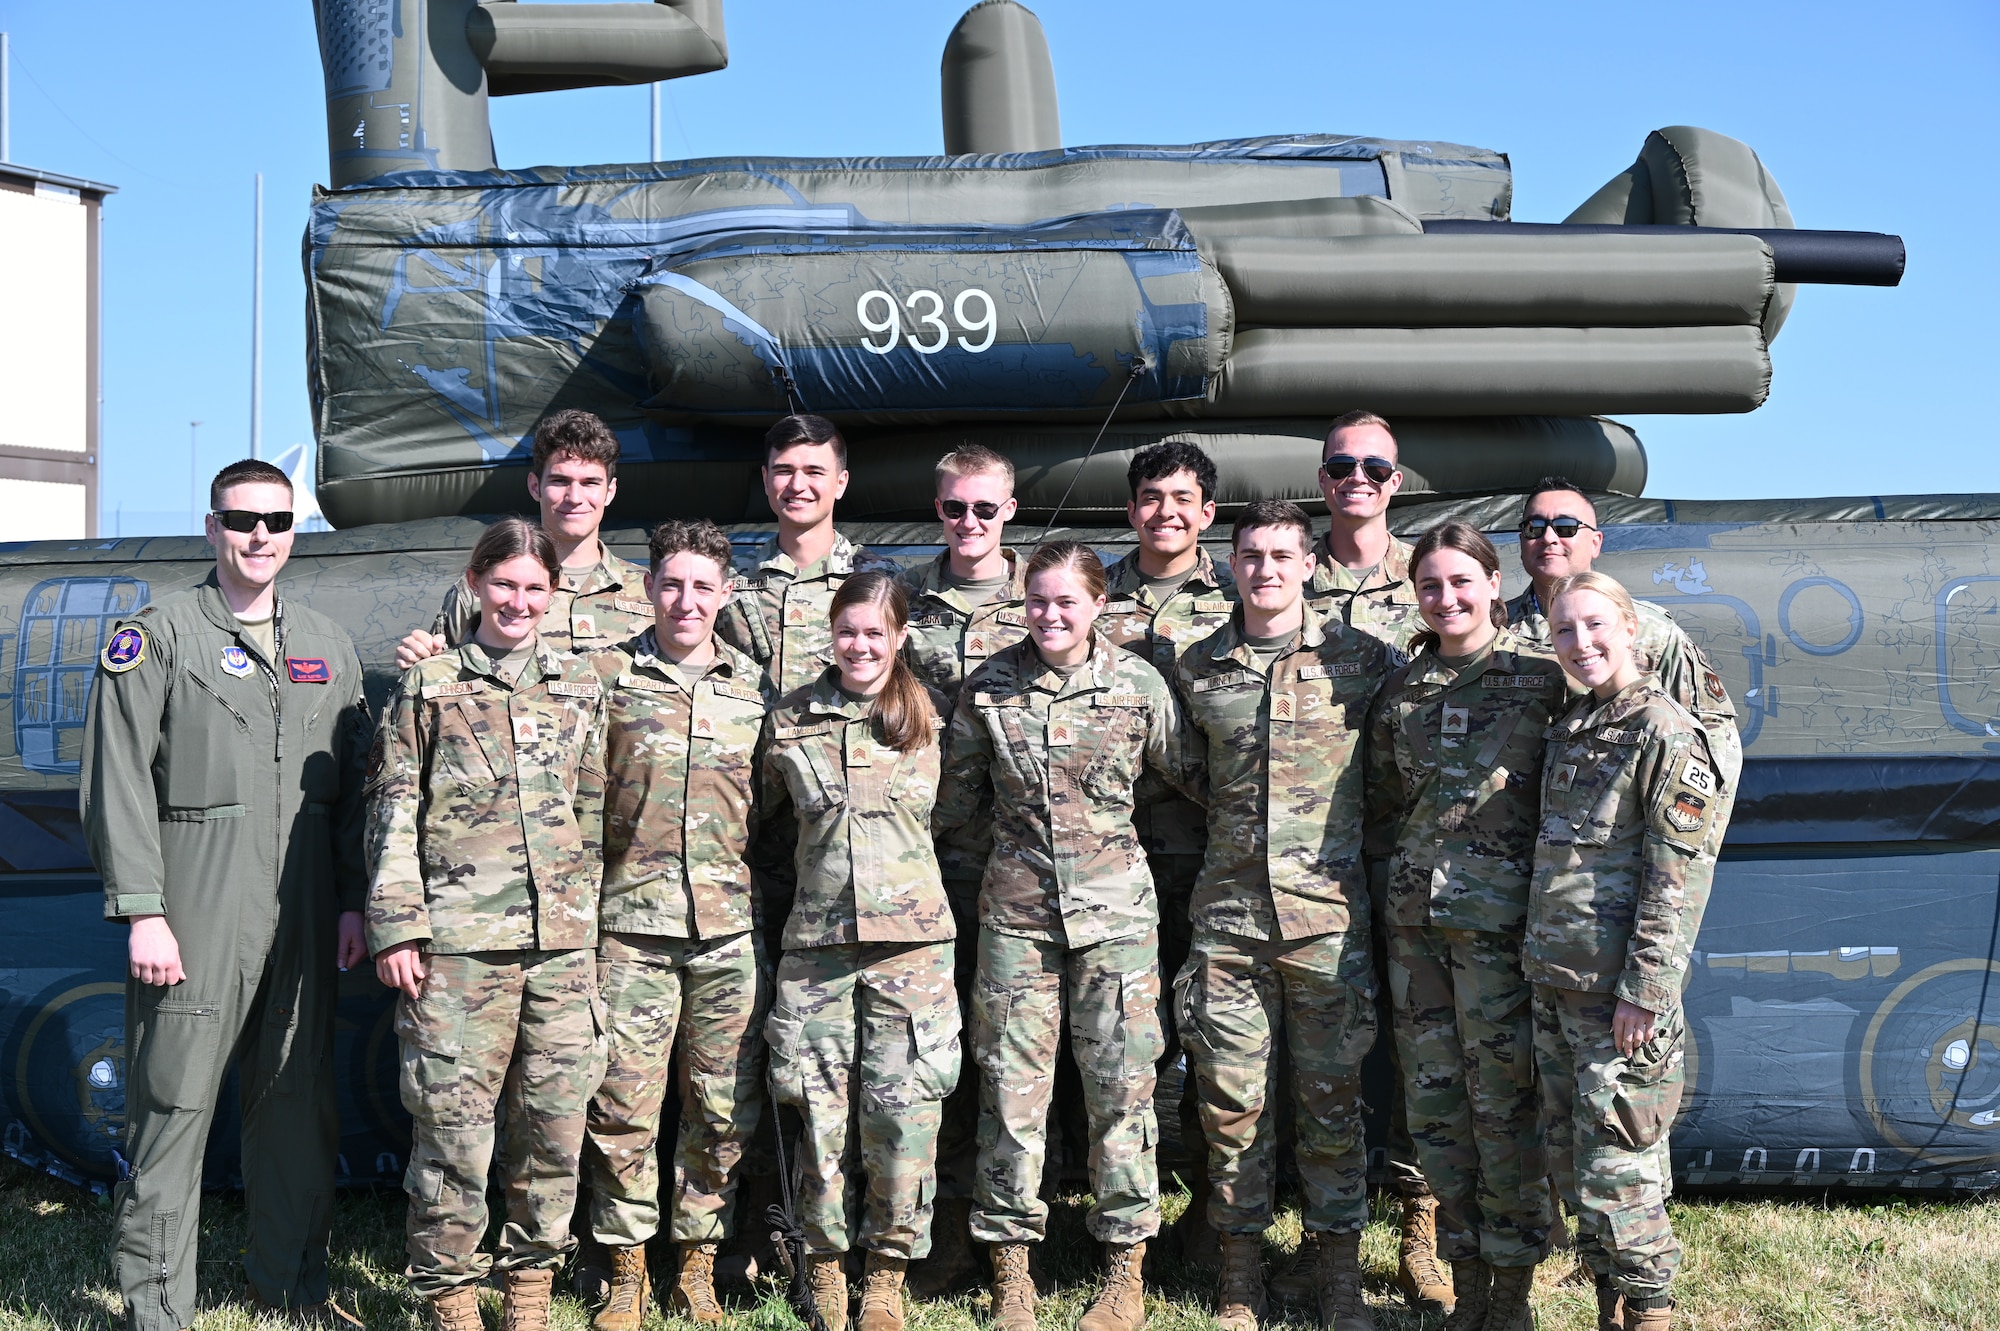 Group photo of USAF Cadets after a tour of the 19th Electronic Warfare Squadron.